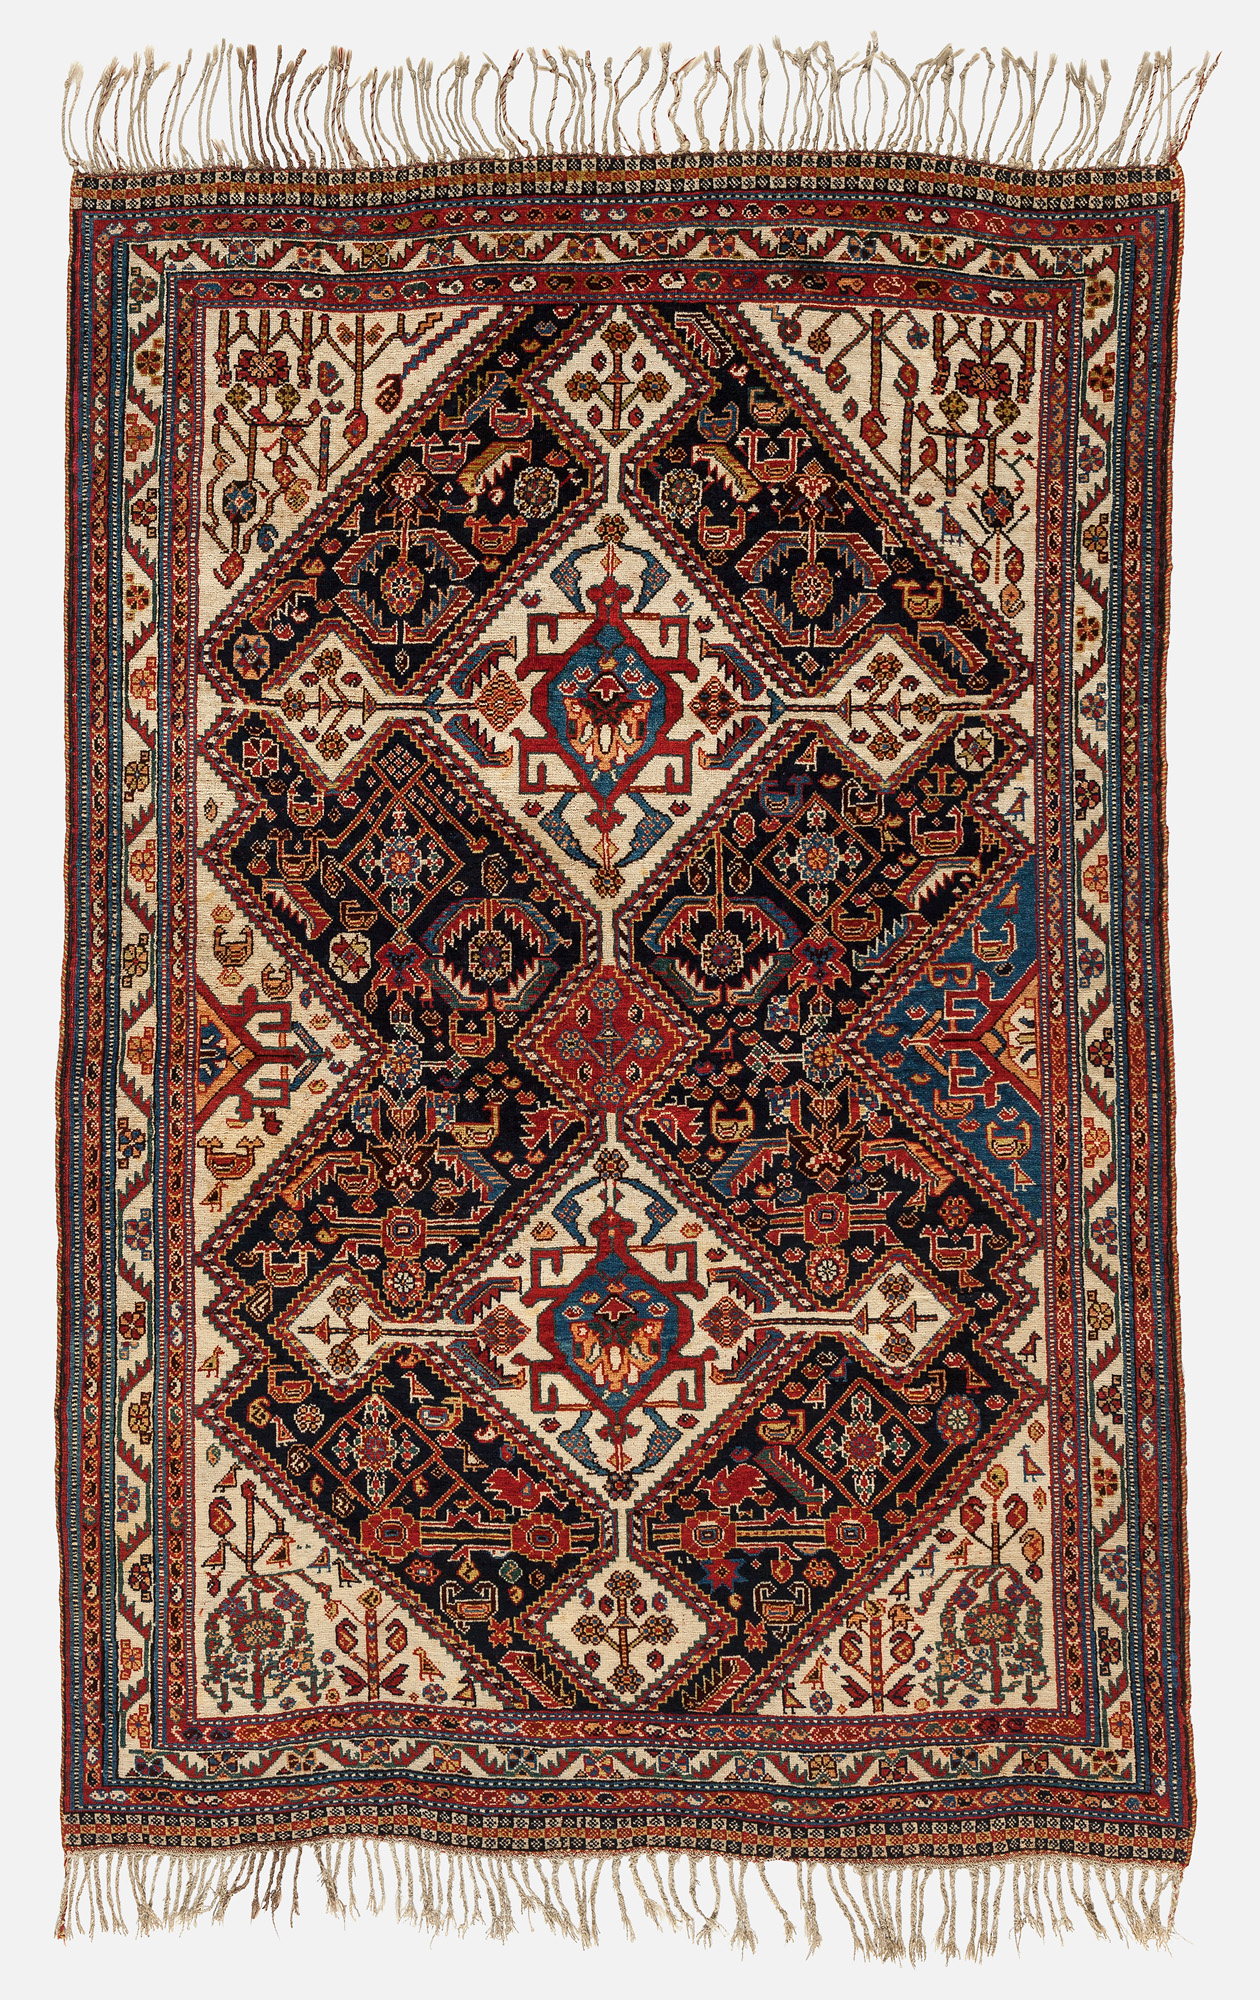 Qashqai rug, Late 19th century, Excellent condition, All natural colours, Not restored, Size: 196 x 125 cm. (77 x 49 inch).